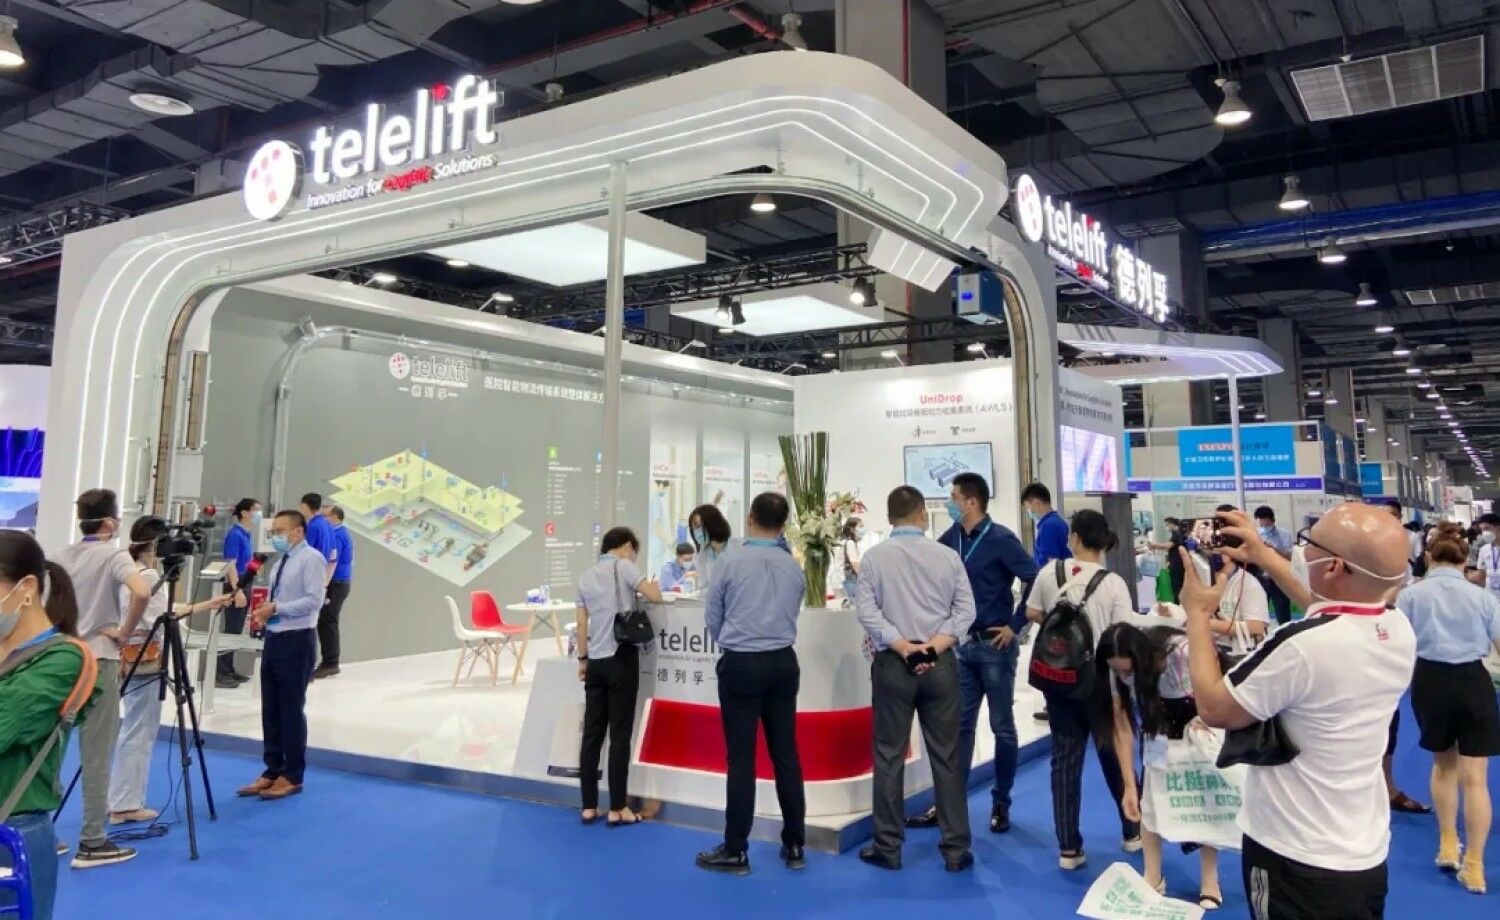 Telelift booth